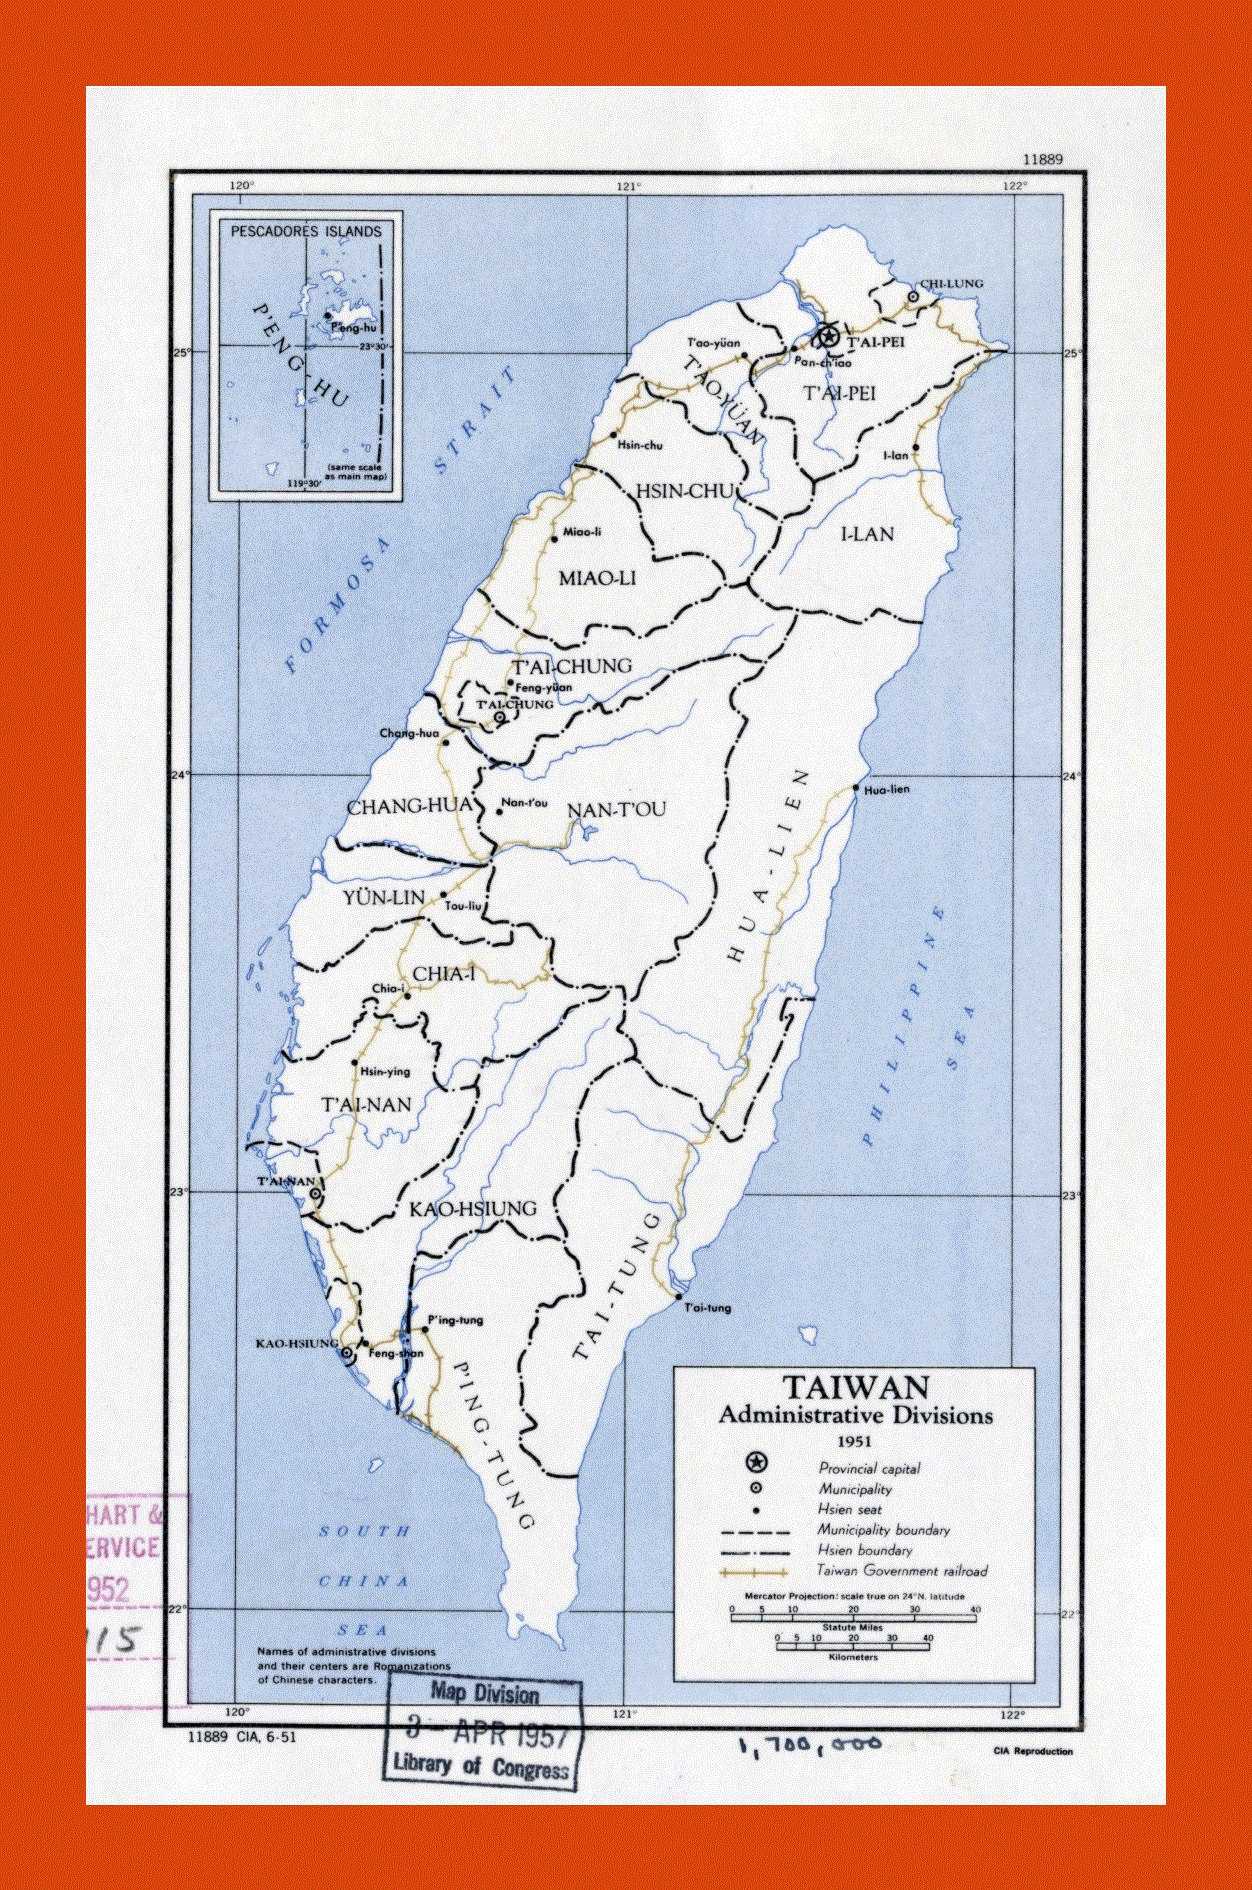 Administrative divisions map of Taiwan - 1951